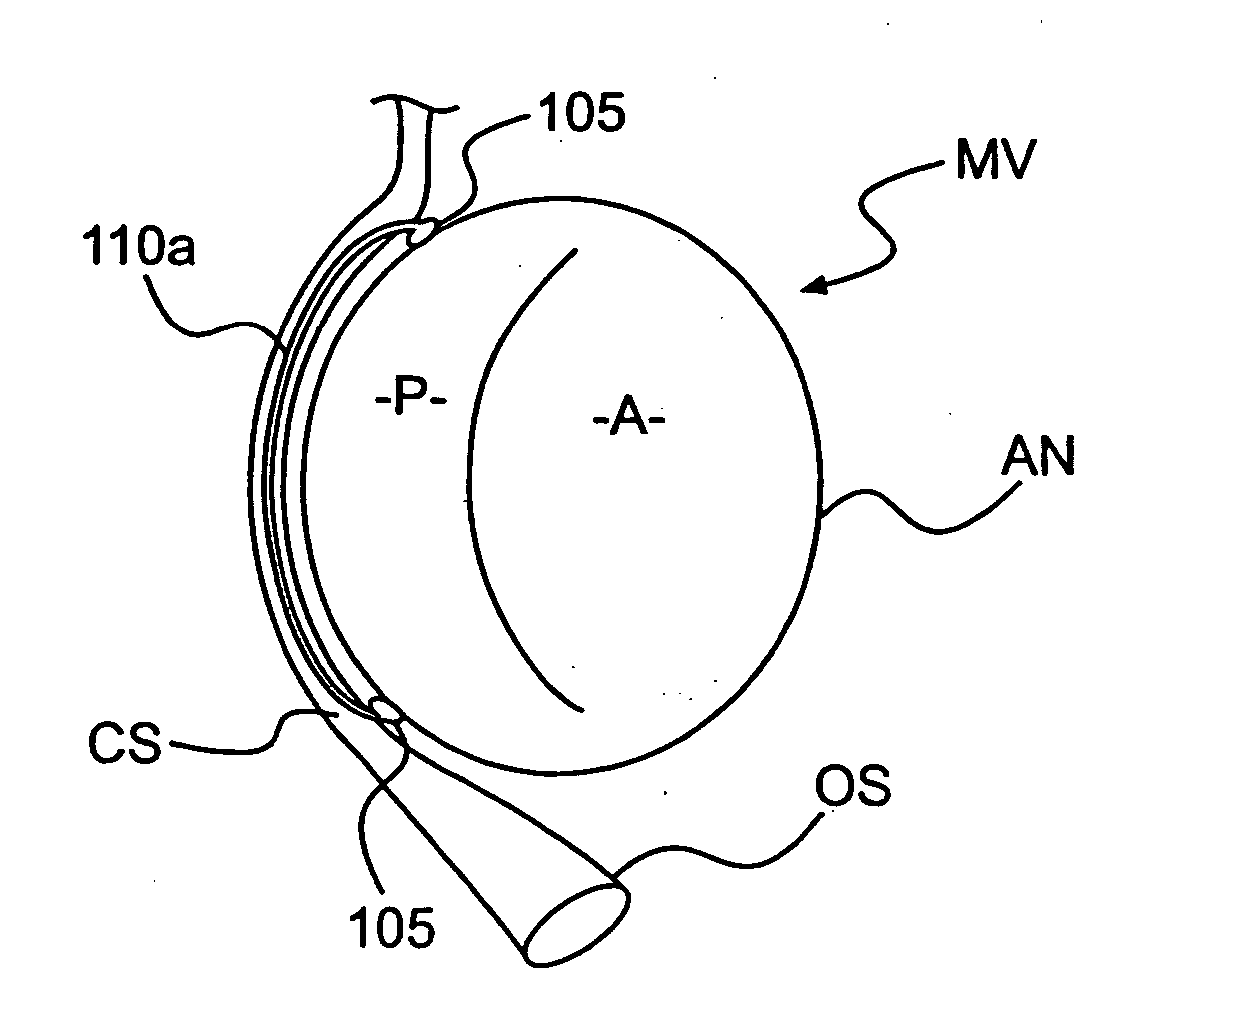 Devices and methods for heart valve treatment